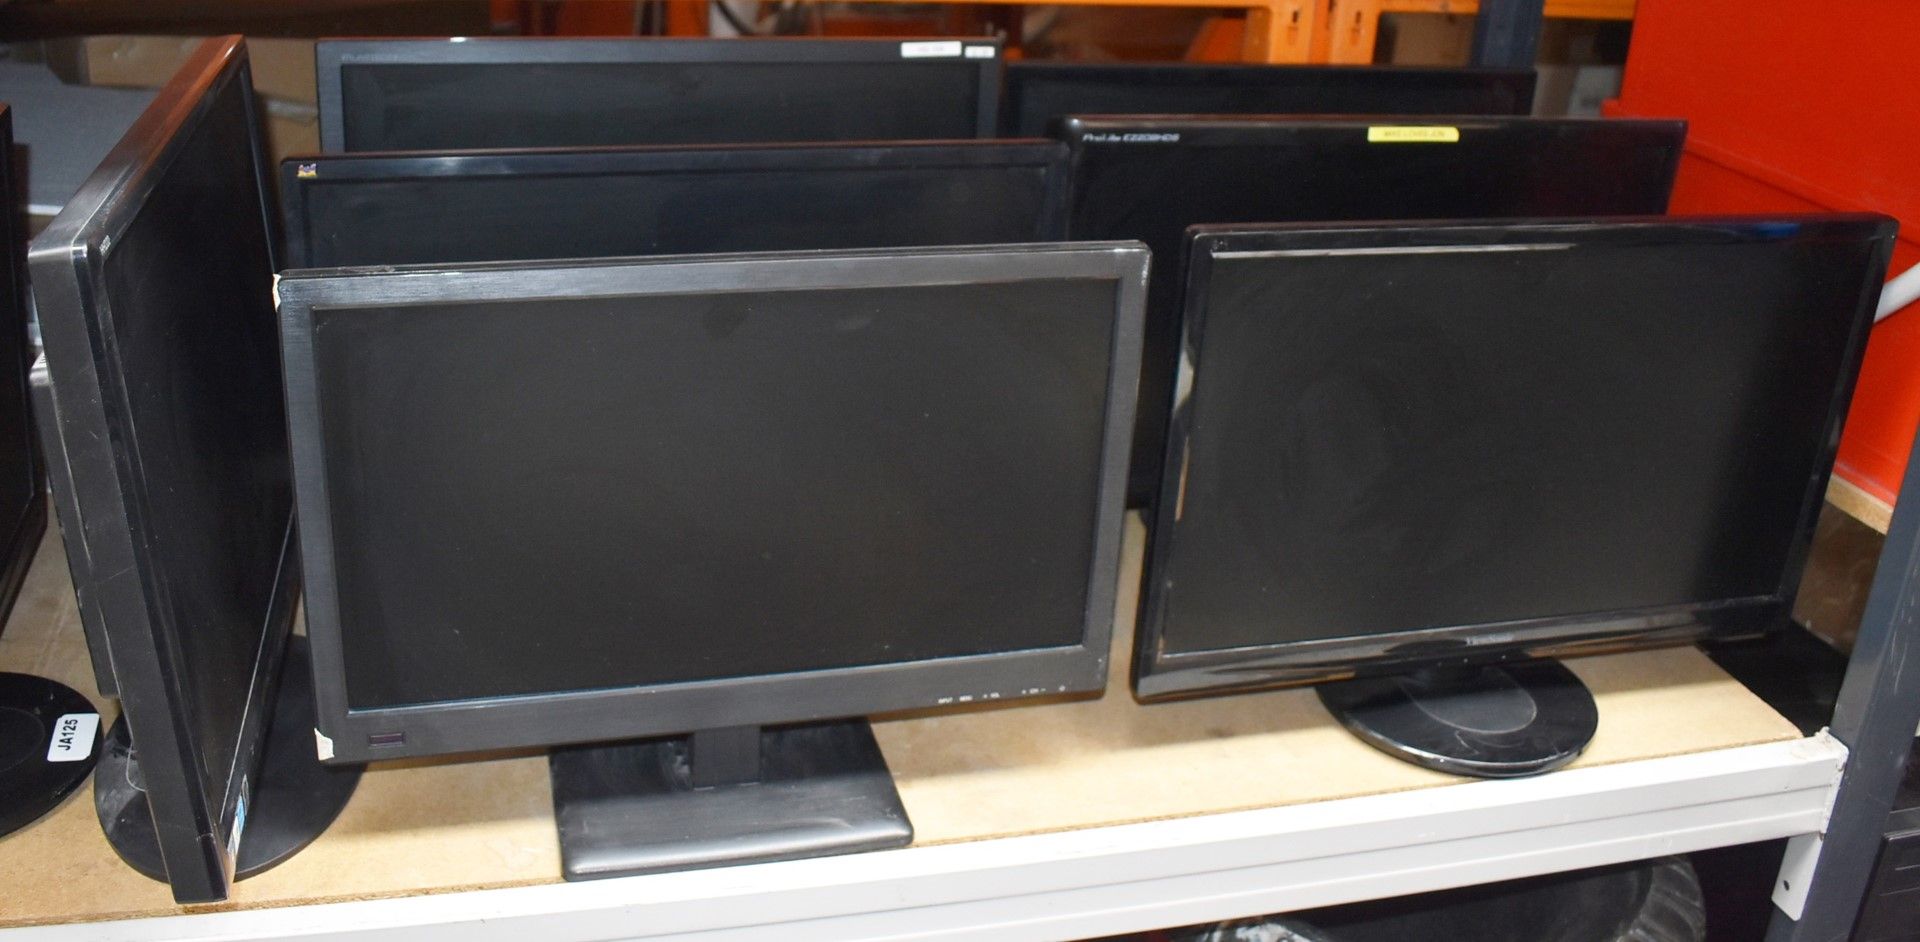 8 x Various Flat Screen Computer Monitors - Mostly 22 Inch Size - Removed From Various Office